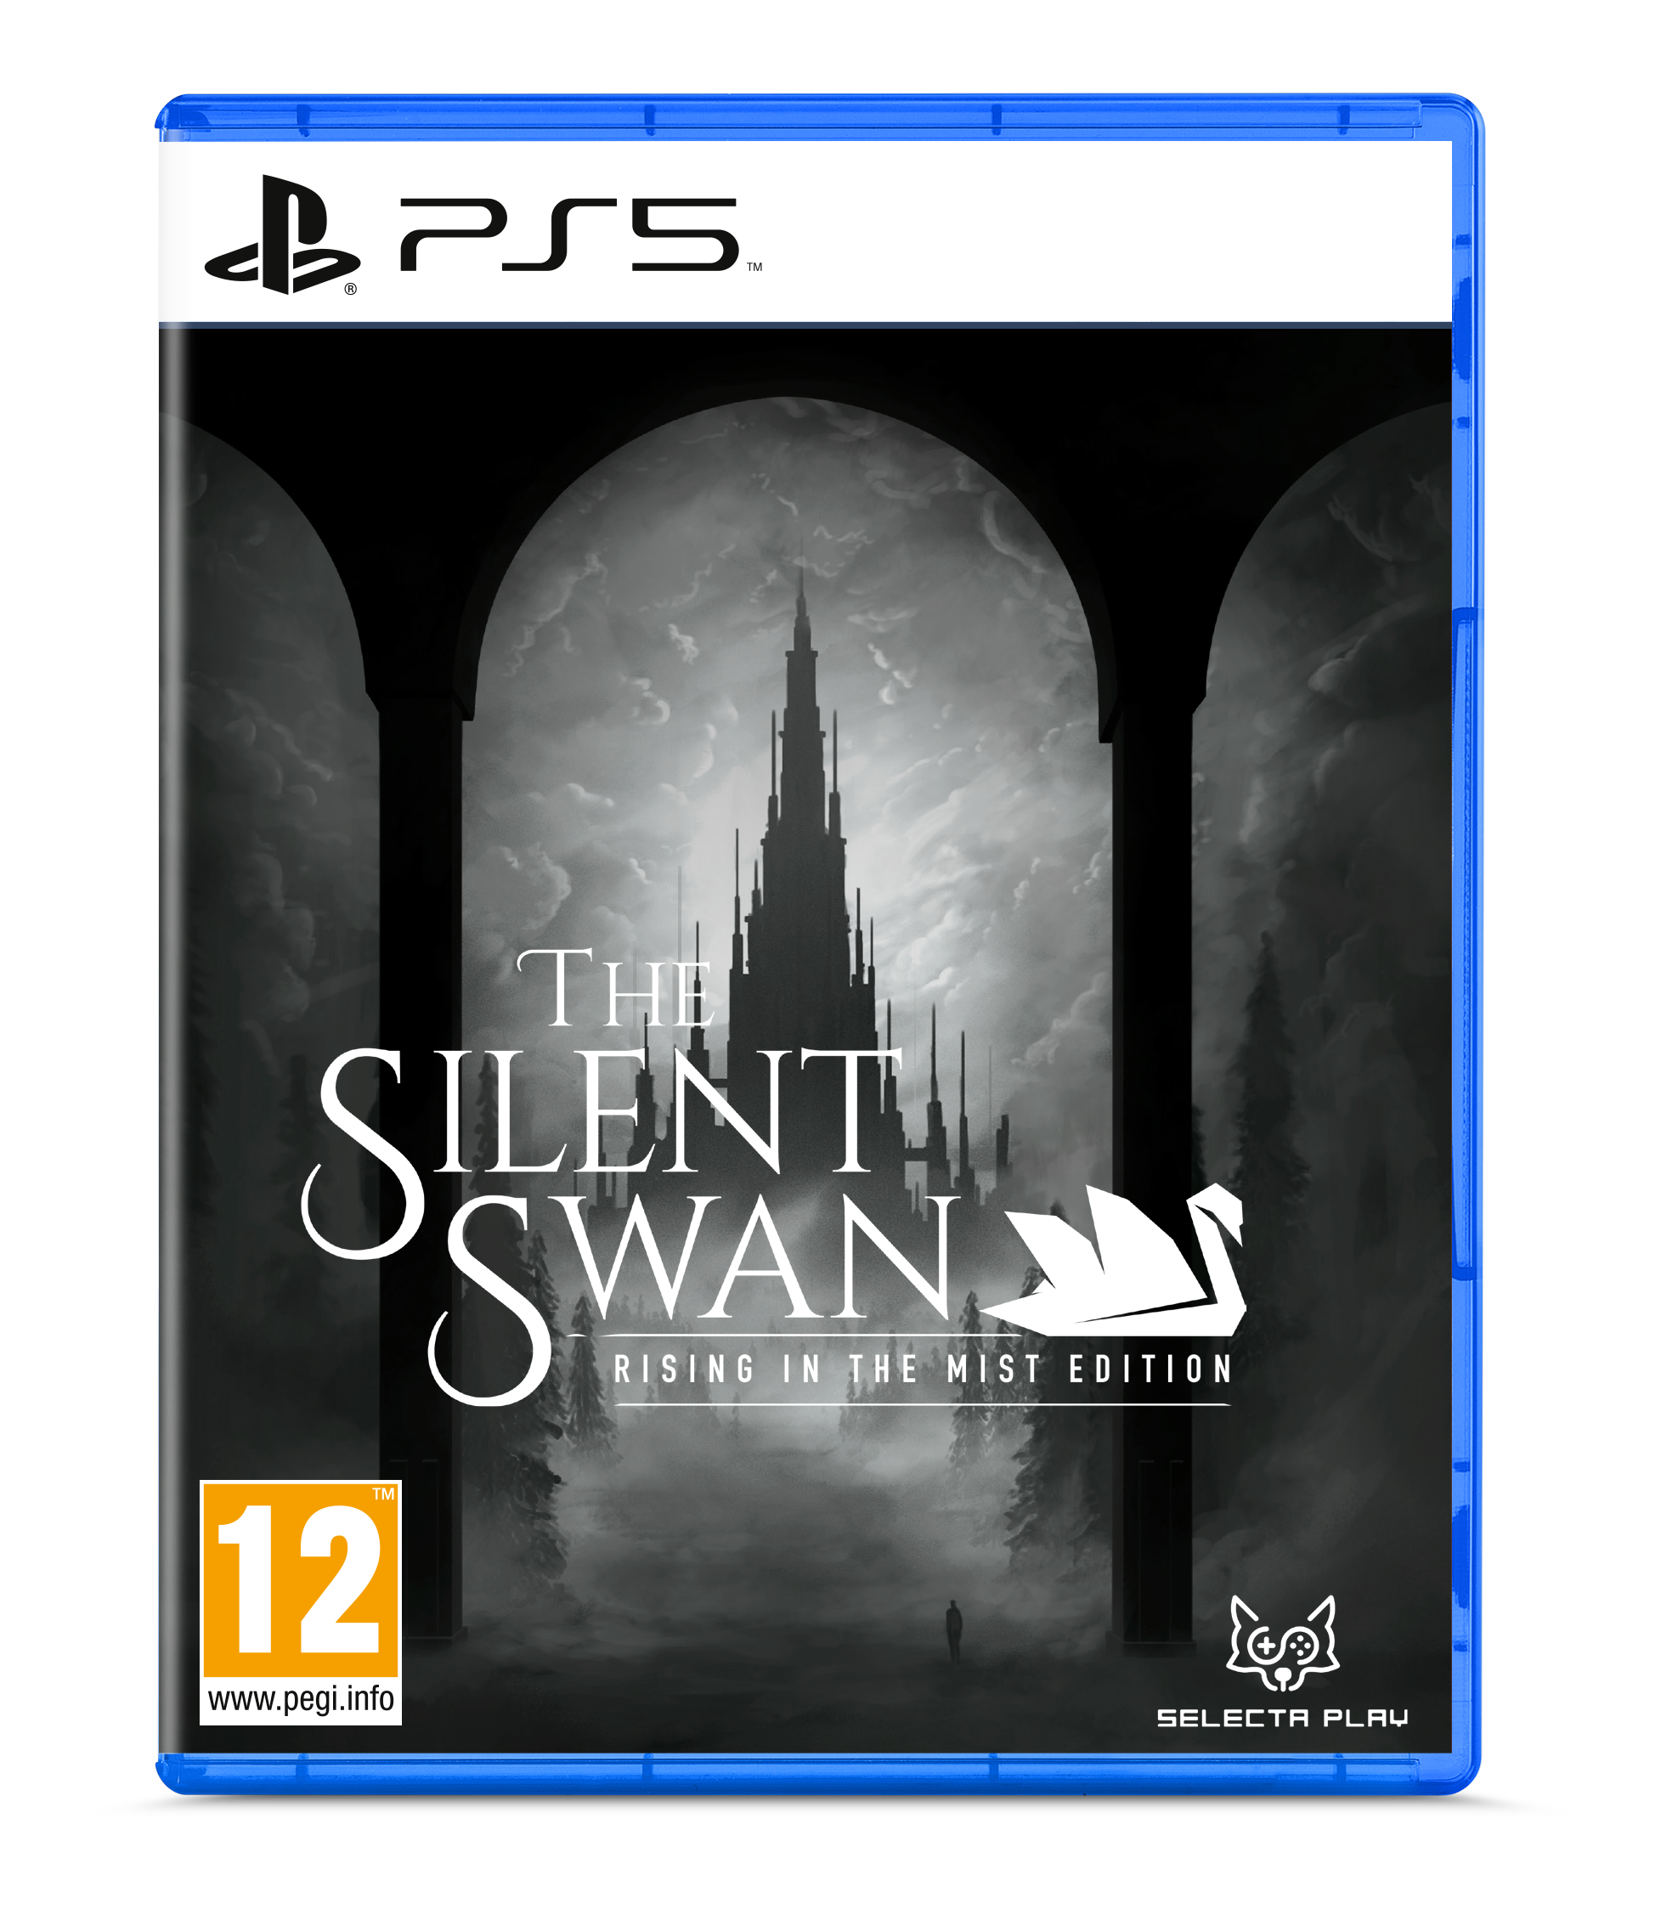 The Silent Swan - Rising in the Mist Edition